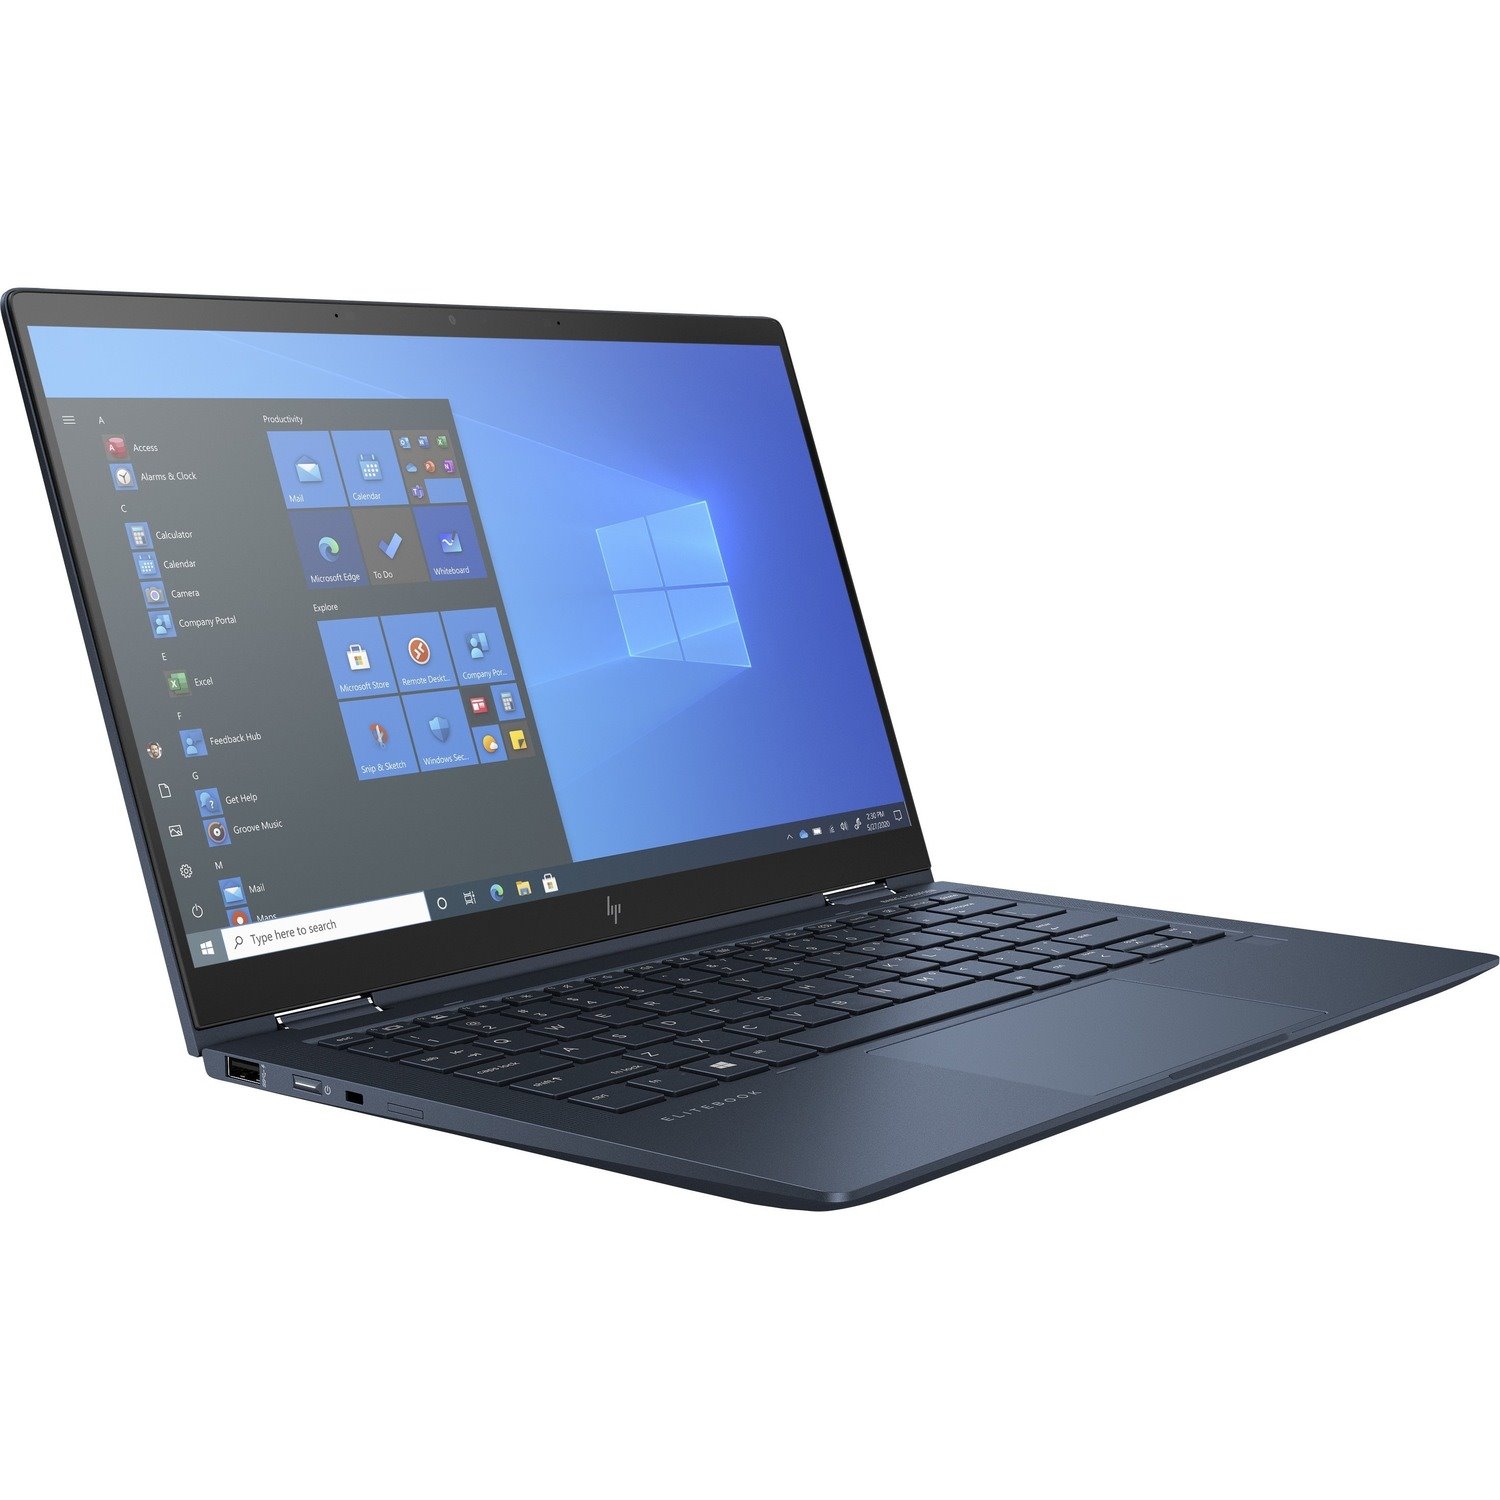 HP Elite Dragonfly G2 33.8 cm (13.3") Touchscreen Convertible 2 in 1 Notebook - Full HD - 1920 x 1080 - Intel Core i7 11th Gen i7-1165G7 Quad-core (4 Core) 2.80 GHz - 16 GB Total RAM - 512 GB SSD